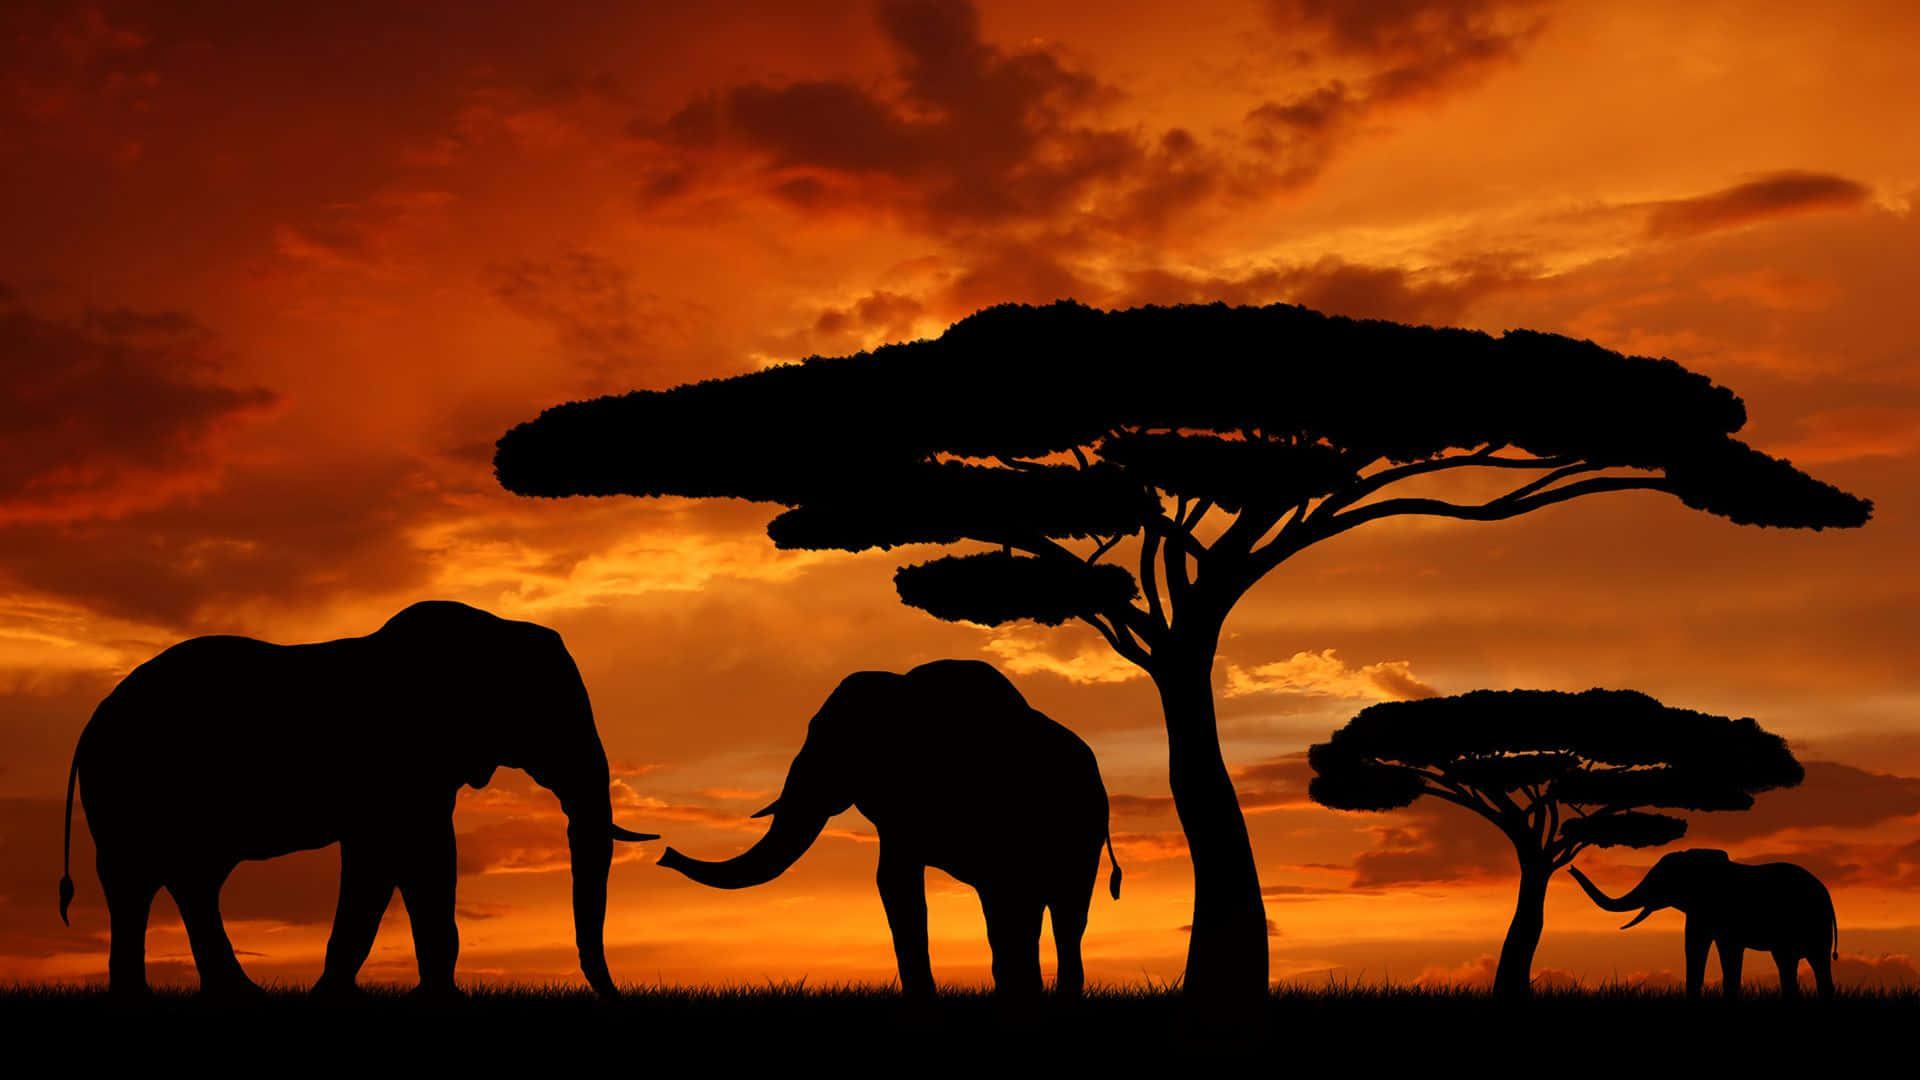 Welcome to Spectacular African Landscapes" Wallpaper